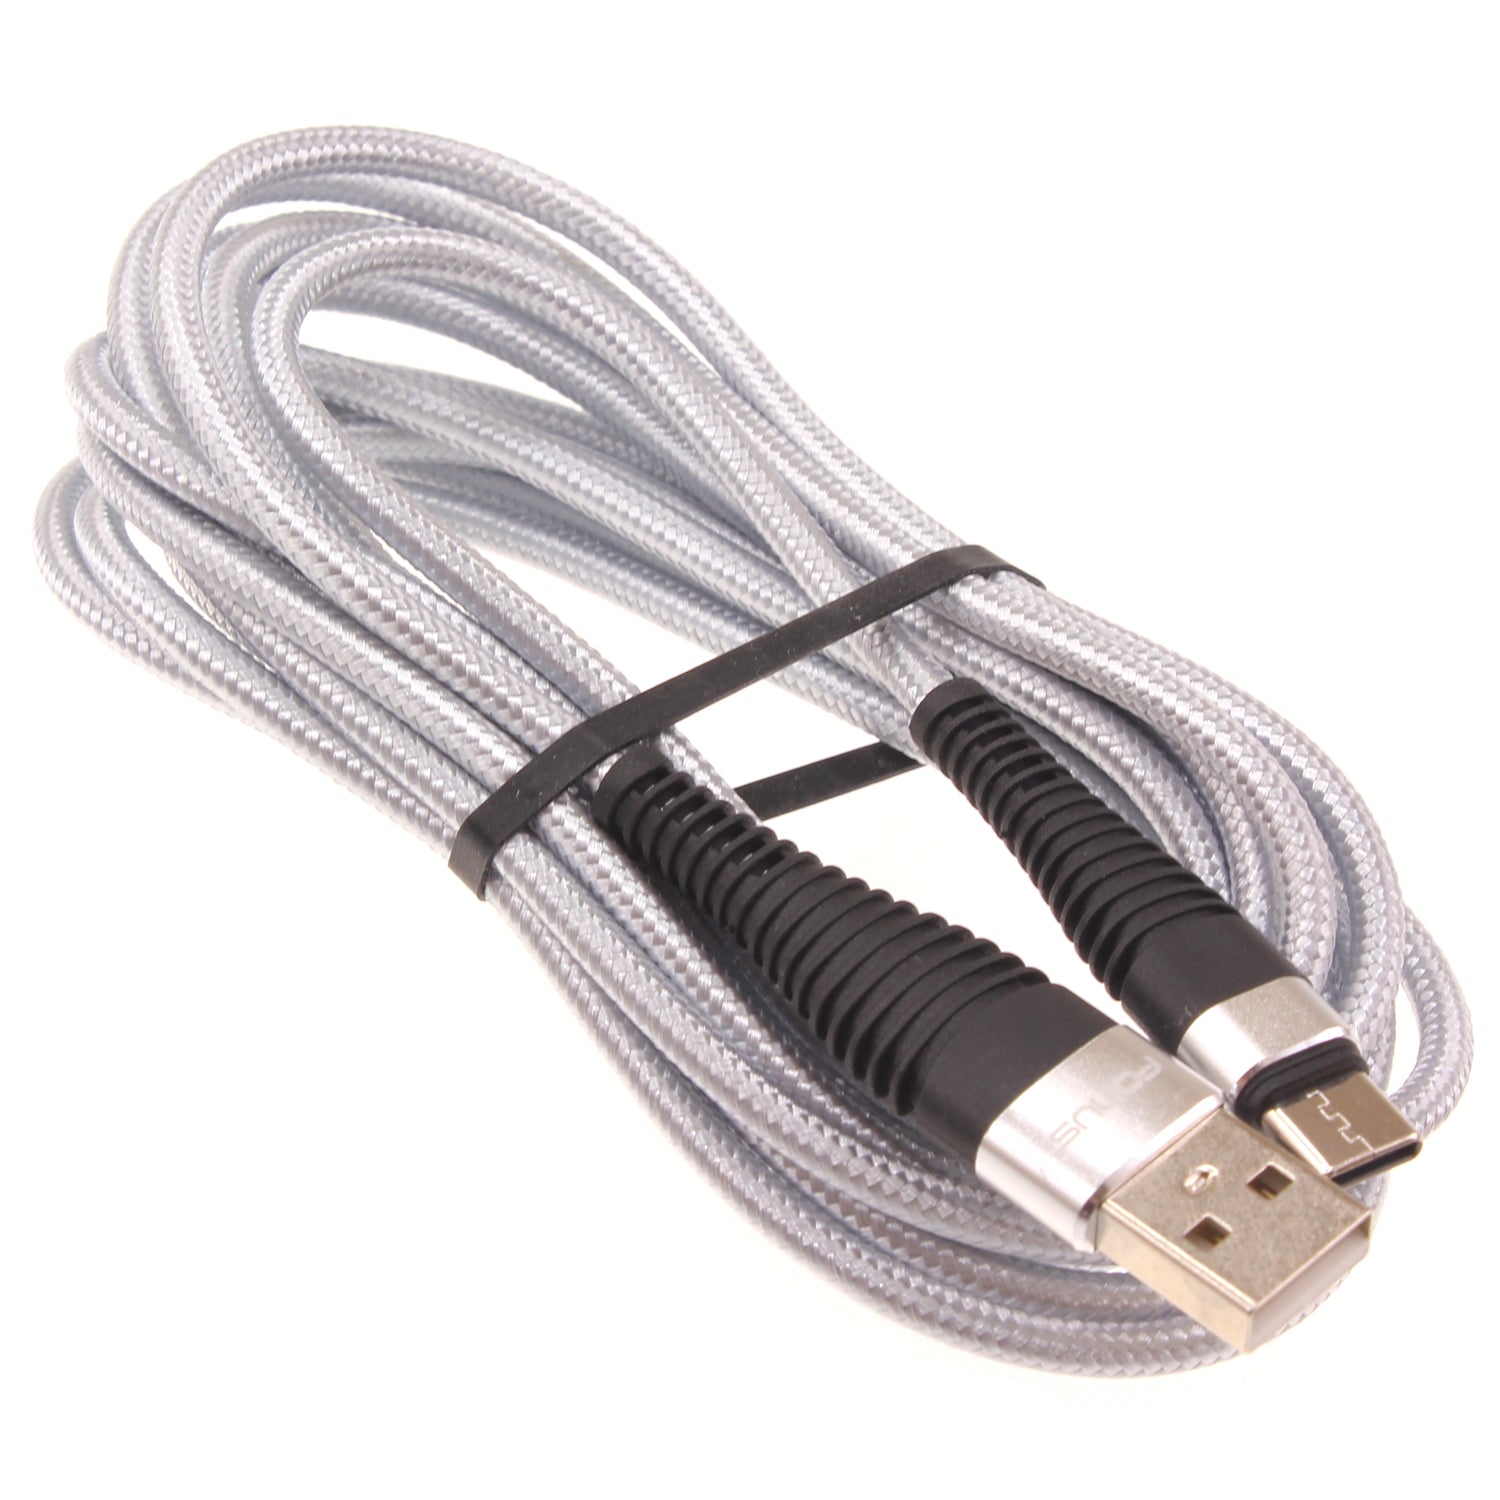 10ft USB-C Cable Long Charger Cord Type-C Power Wire  - BFK10 1460-1